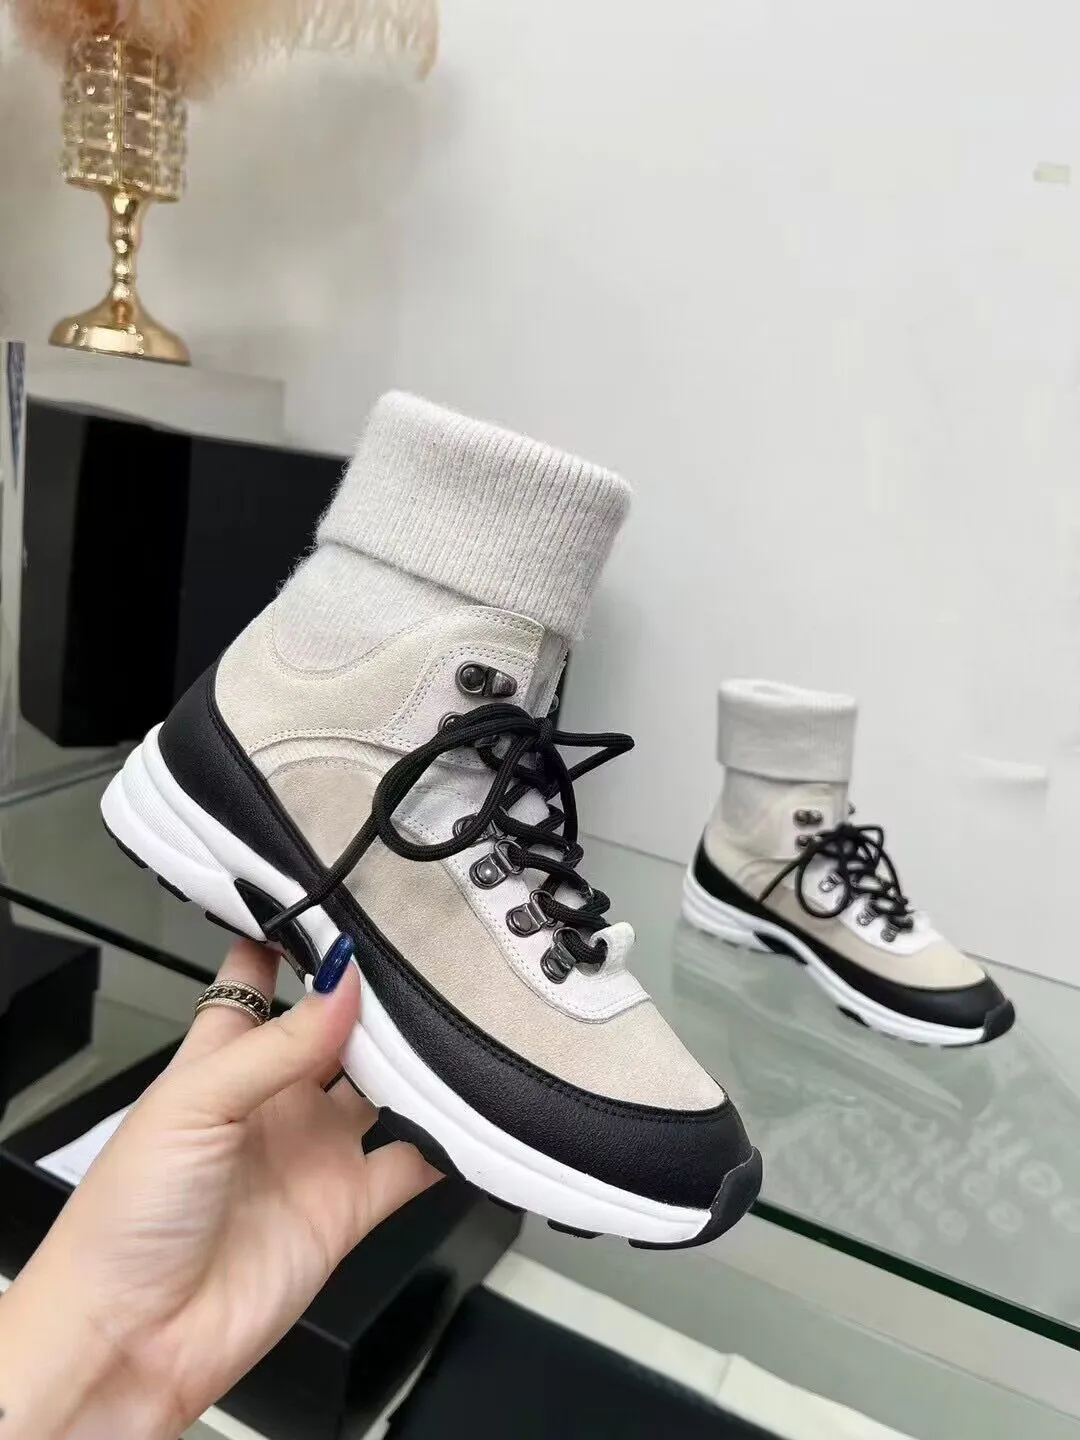 socks boots designer shoe spring autumn fashion womens High top shoes leather thick bottom lady Trainers platform woman Lace up short Sneakers size 35-41 With box